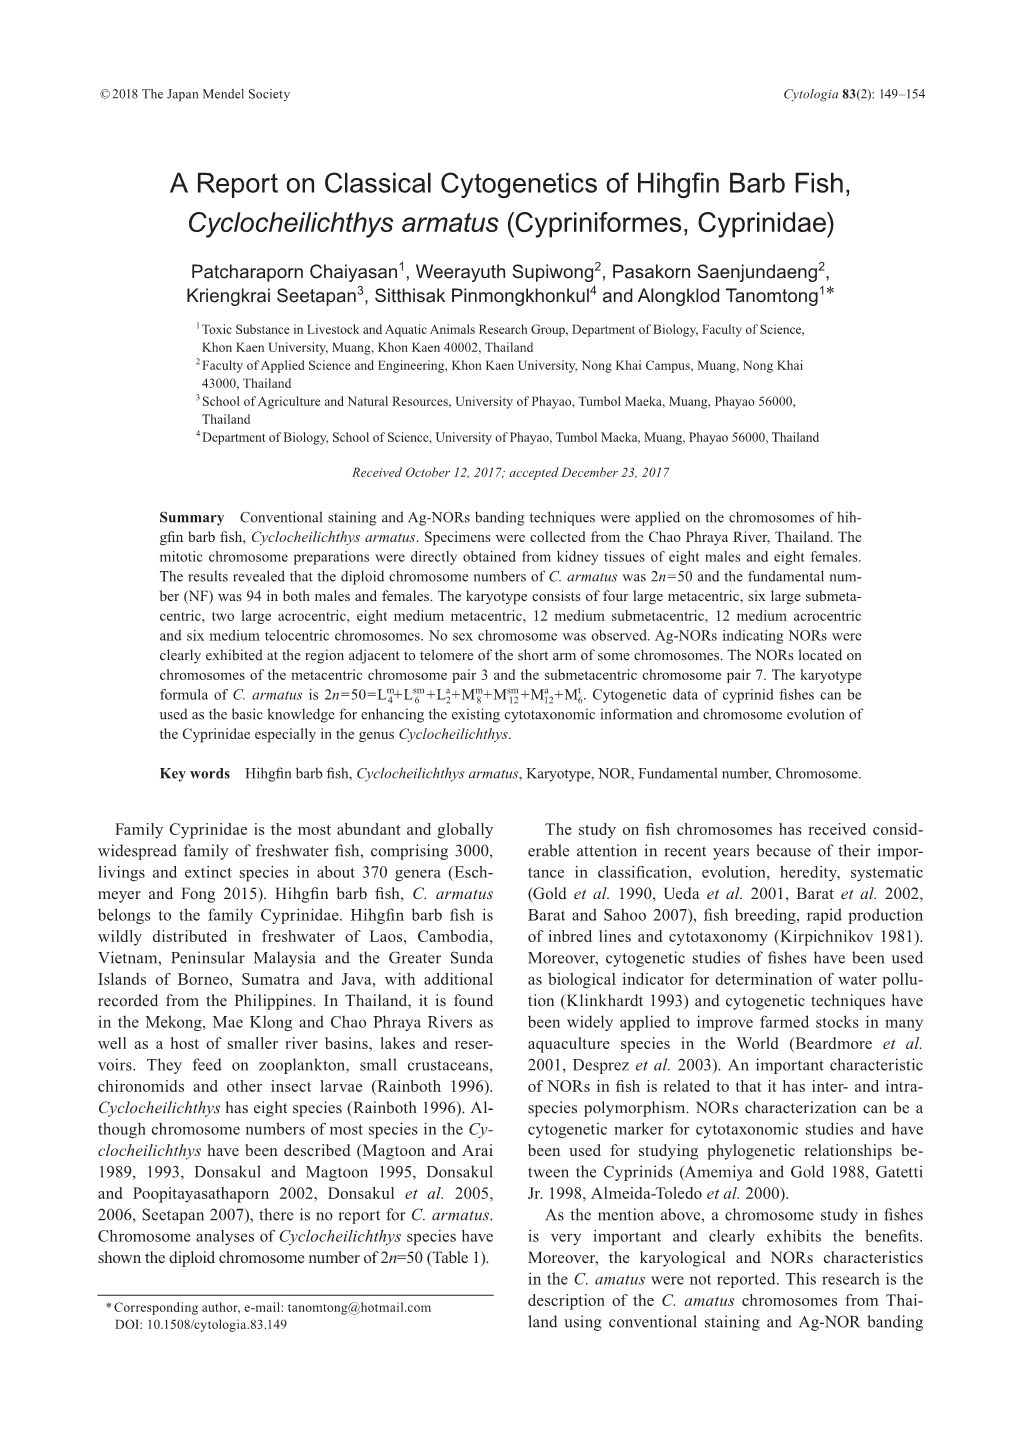 A Report on Classical Cytogenetics of Hihgfin Barb Fish, Cyclocheilichthys